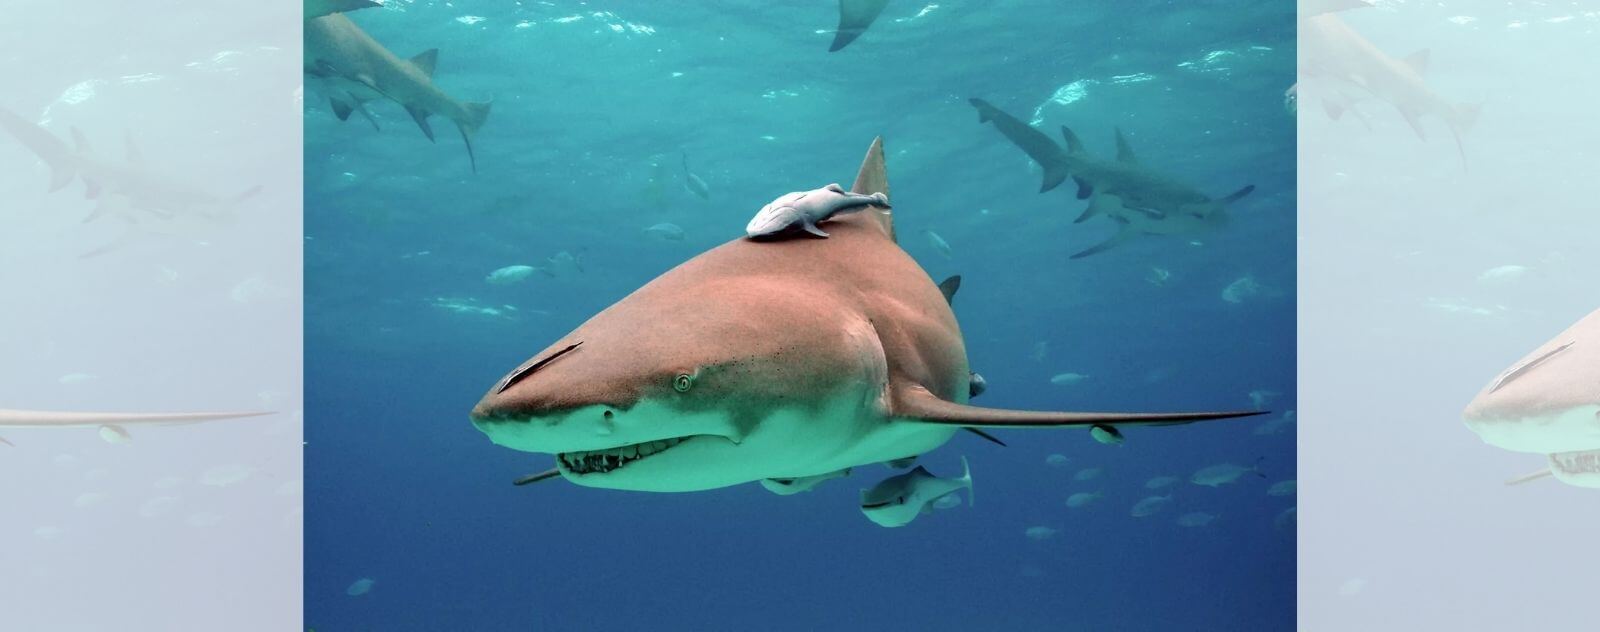 Lemon Shark with its Congeners and Fish on It